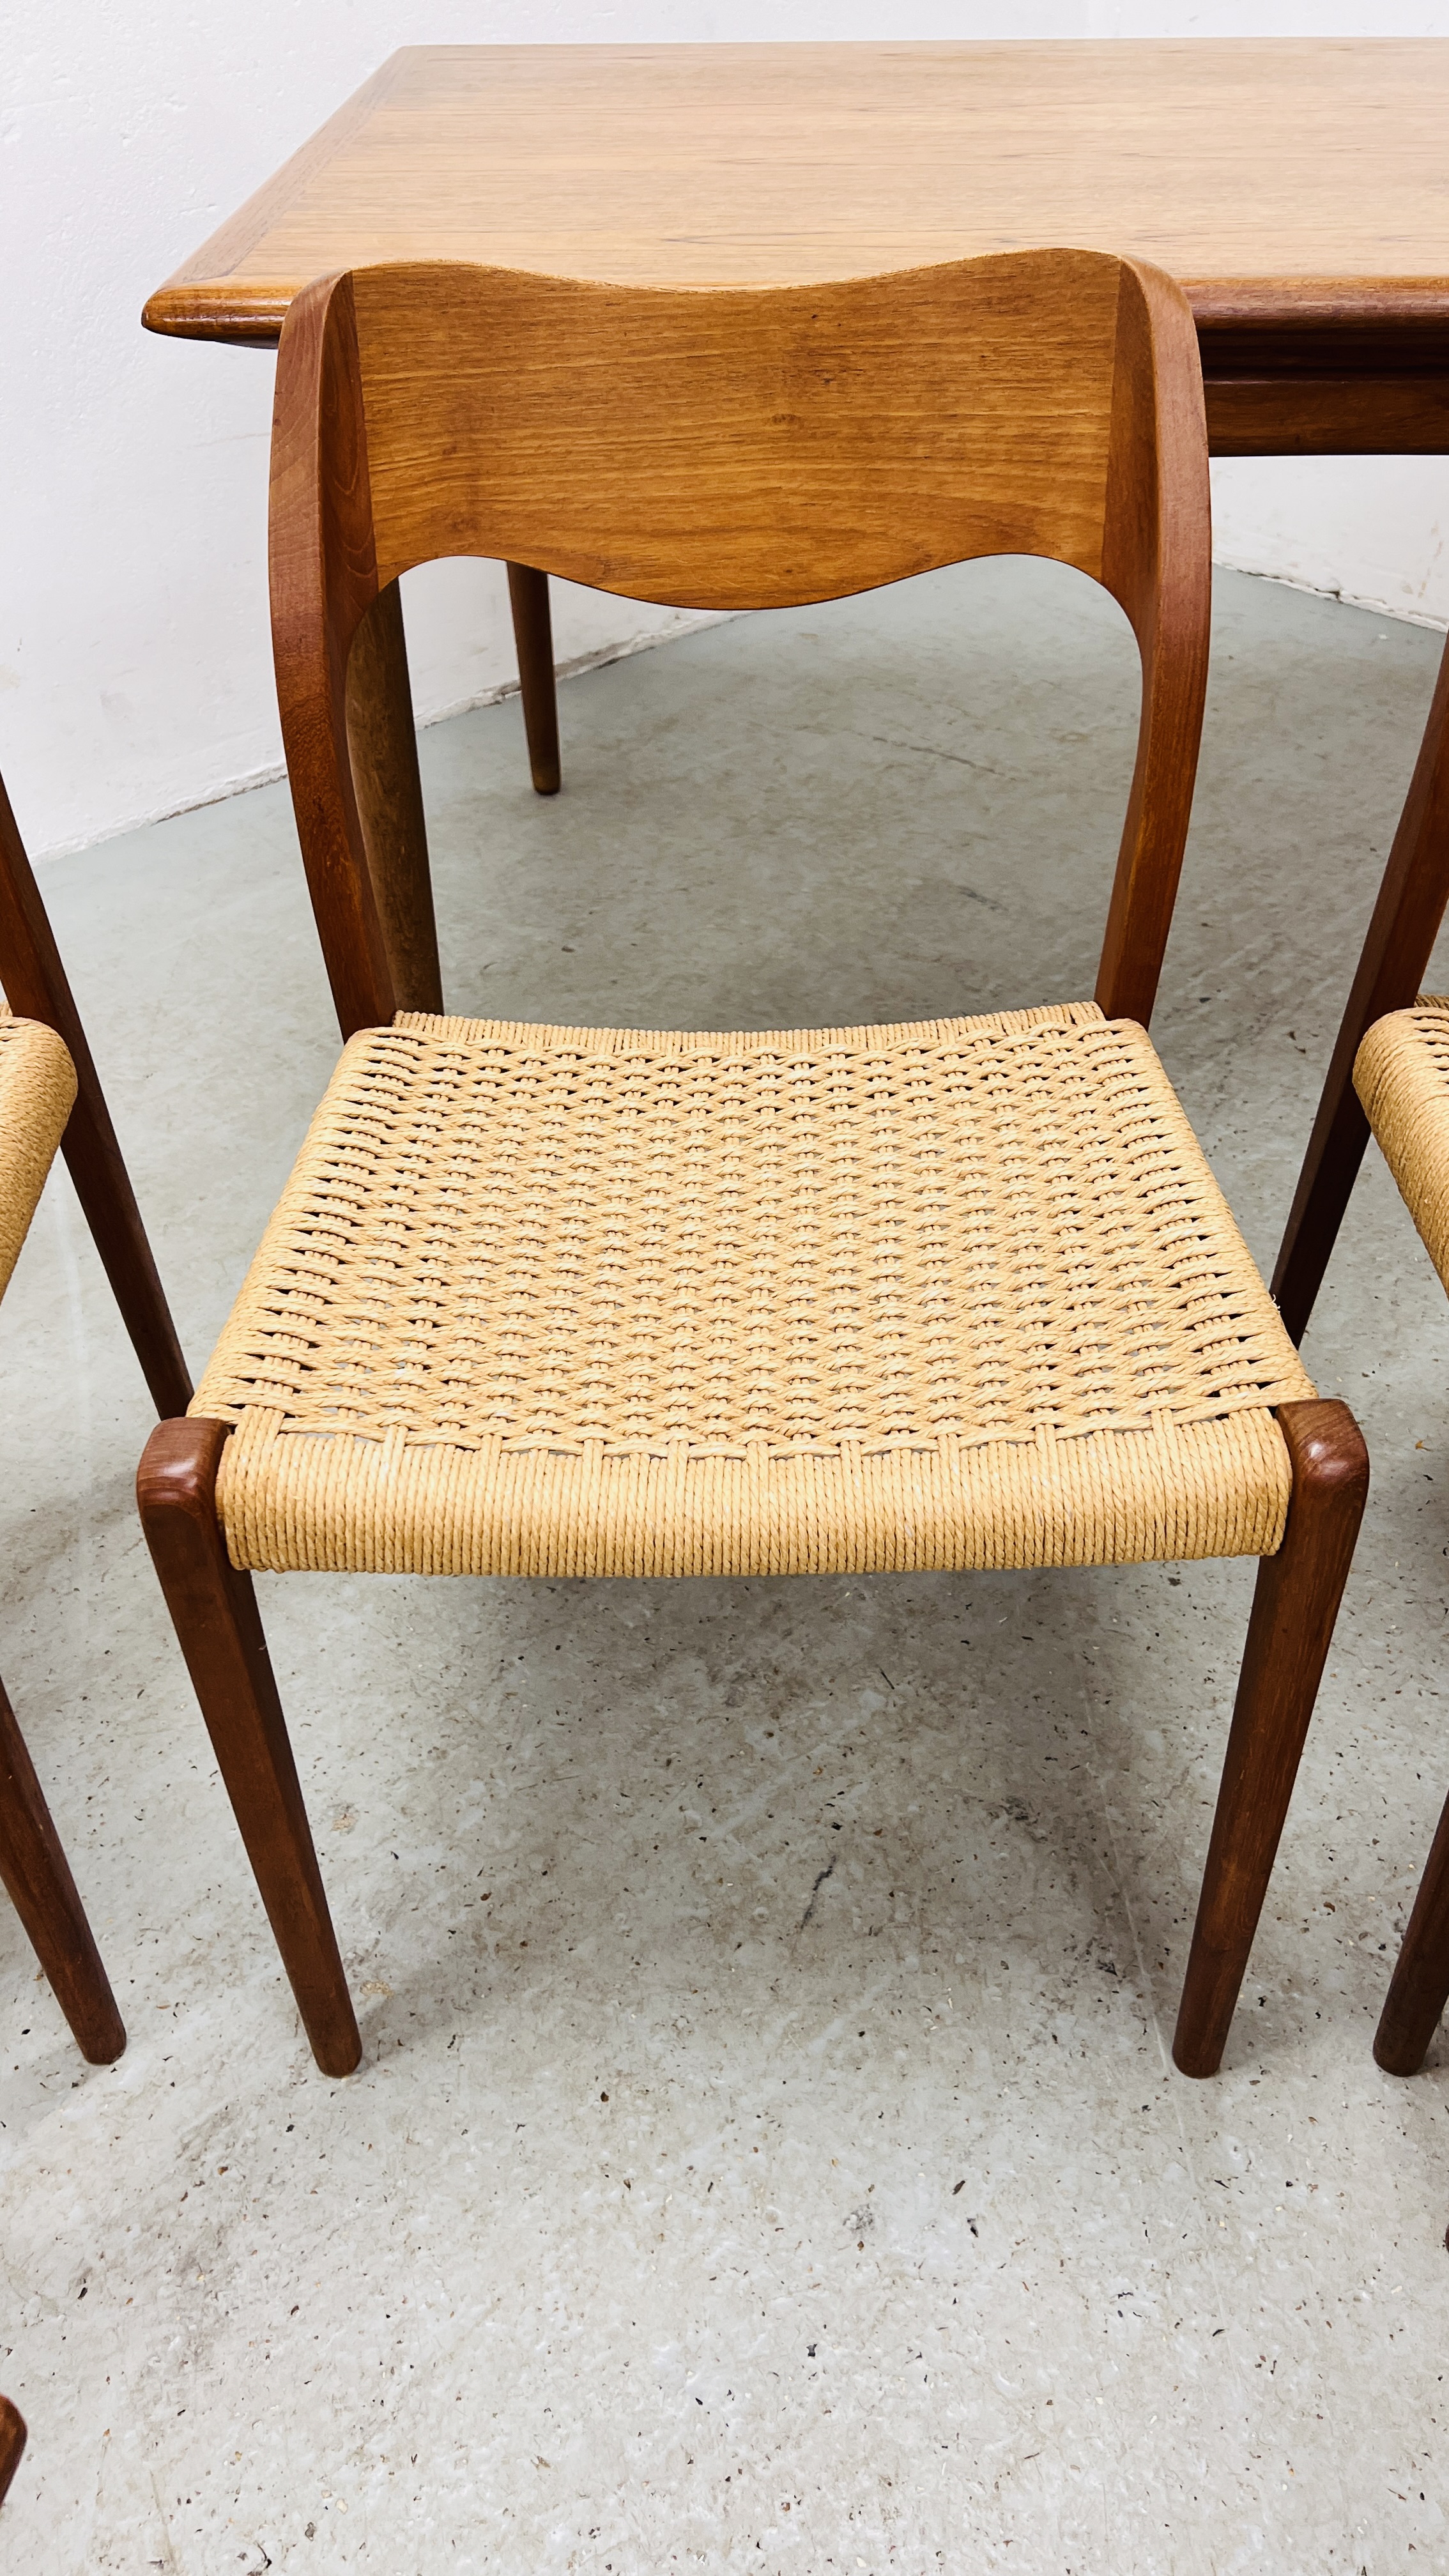 SET OF EIGHT J MOLLER DANISH TEAK DINING CHAIRS WITH WOVEN SISAL SEATS ALONG WITH A DRAWER LEAF - Image 16 of 48